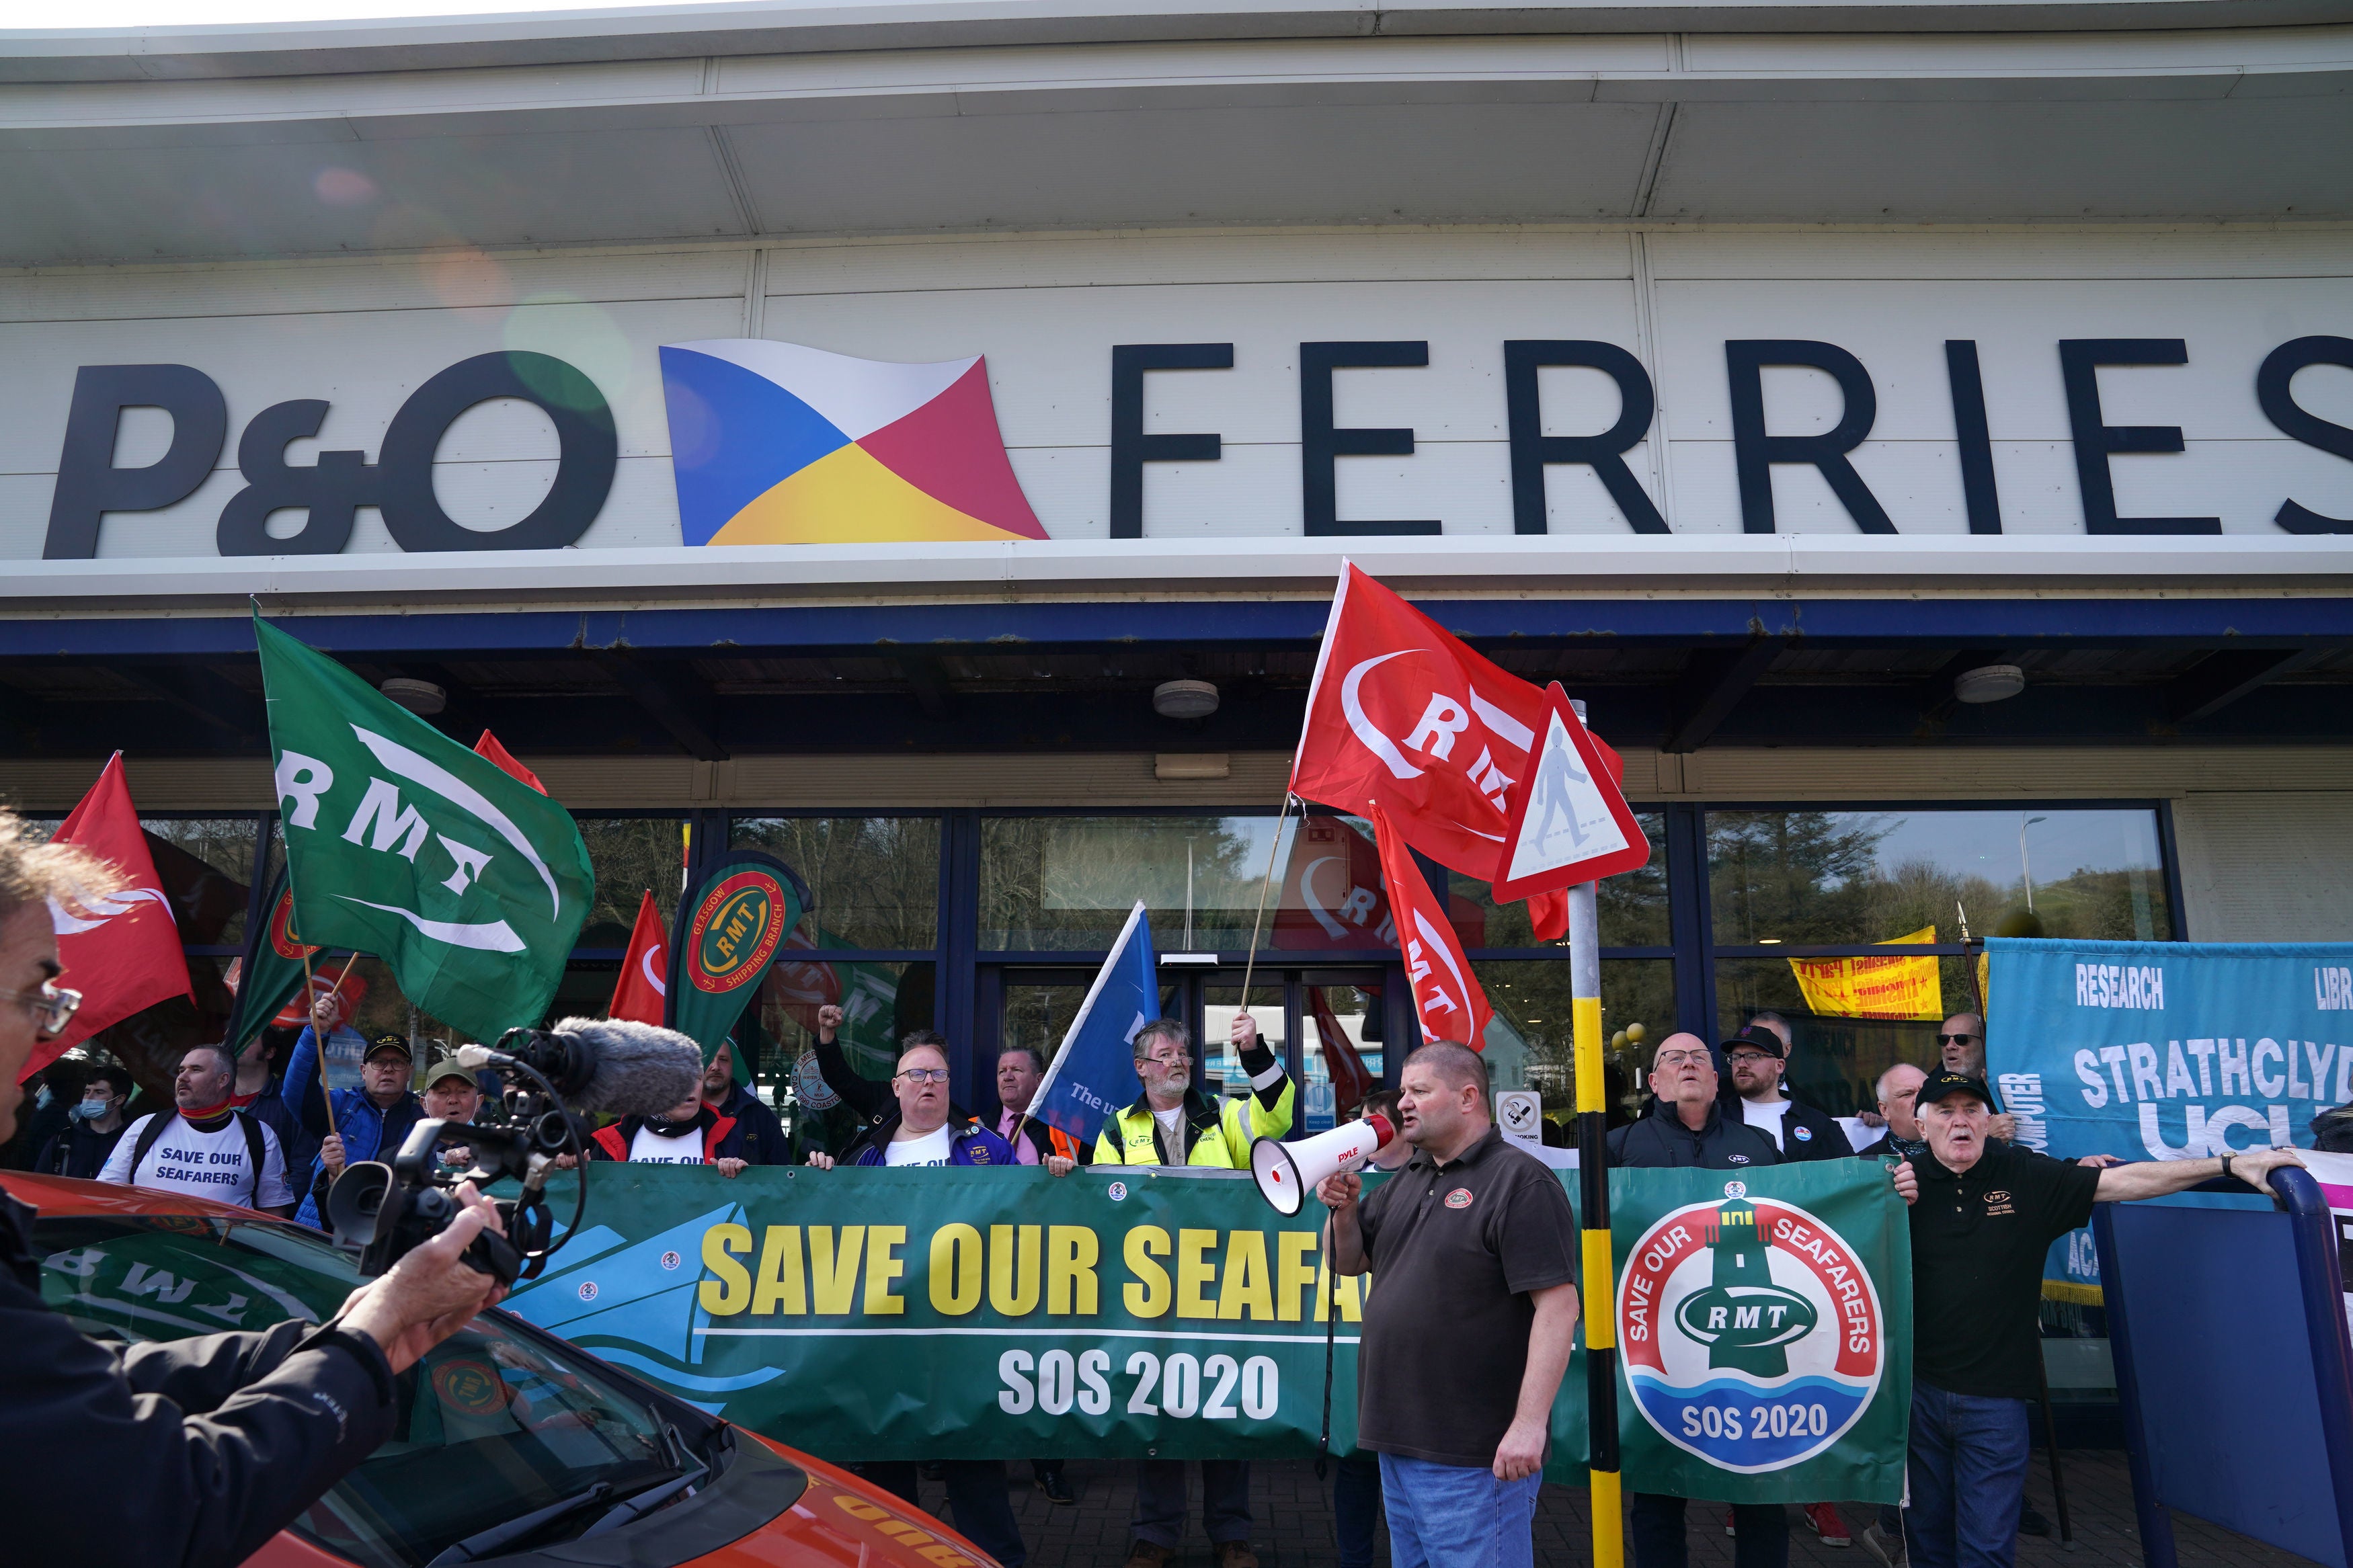 P&O Ferries has faced fury over its sacking of 800 workers